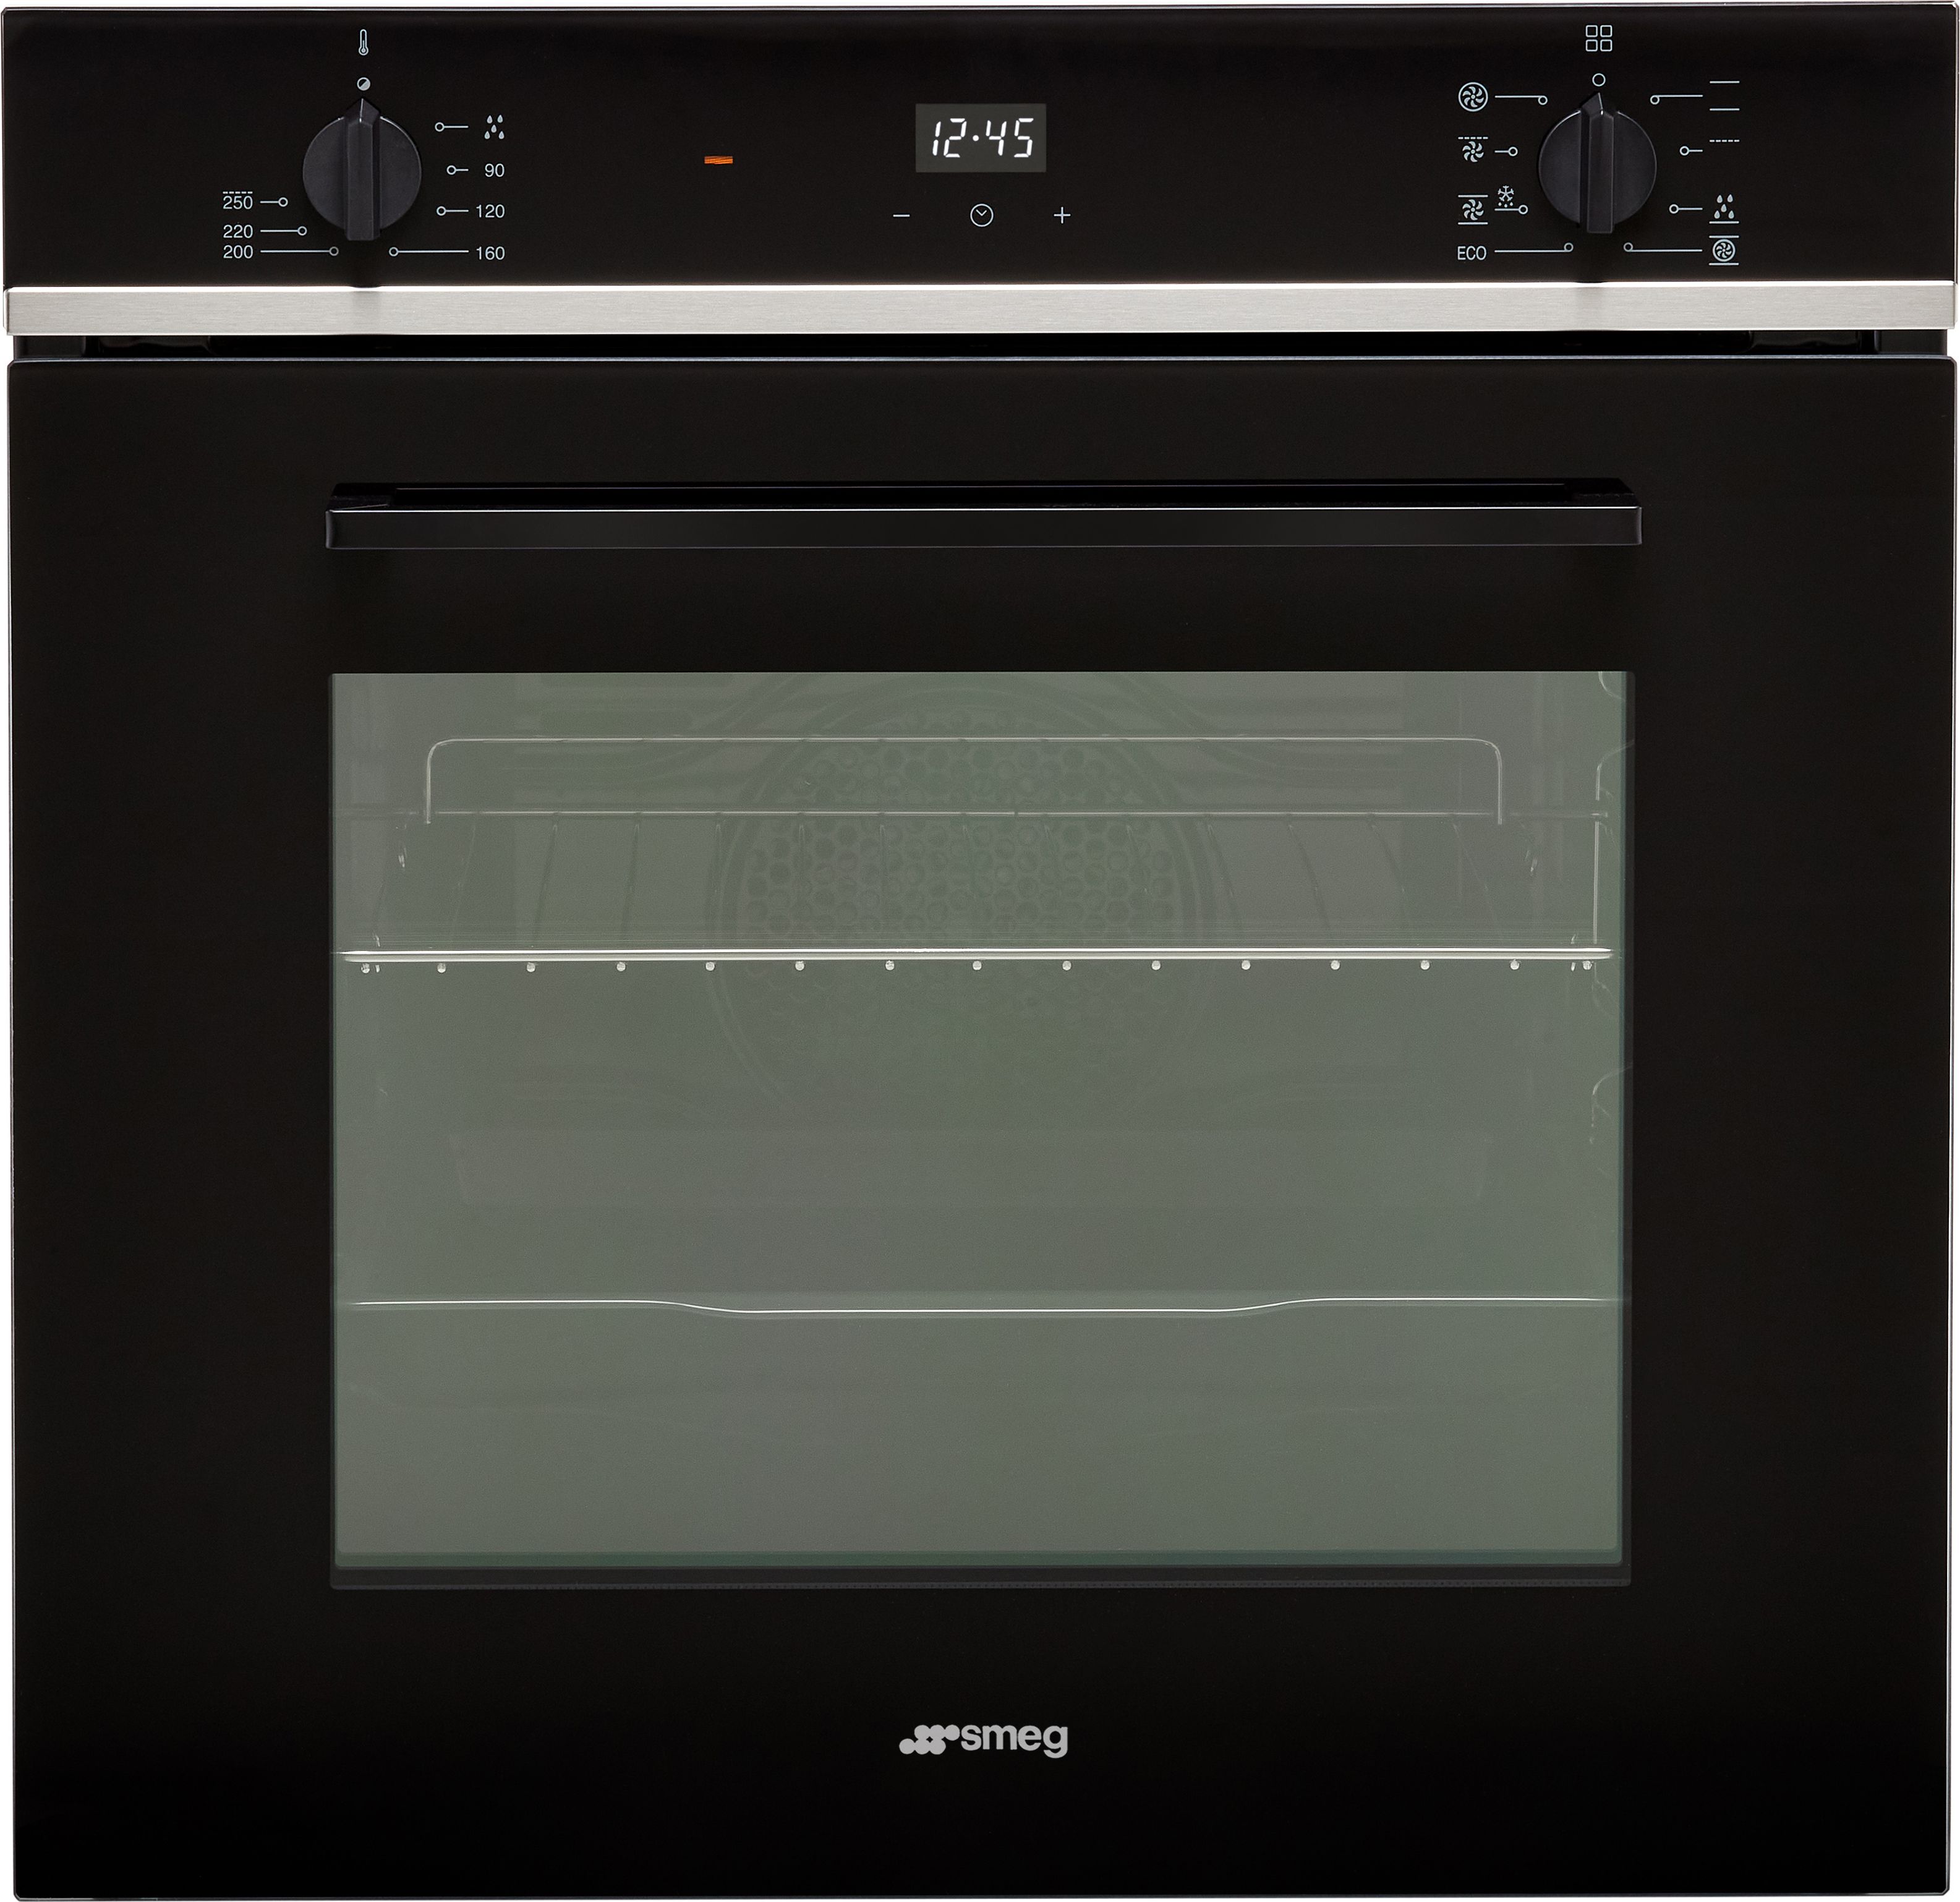 Smeg Cucina SF6400TB Built In Electric Single Oven - Black - A Rated, Black